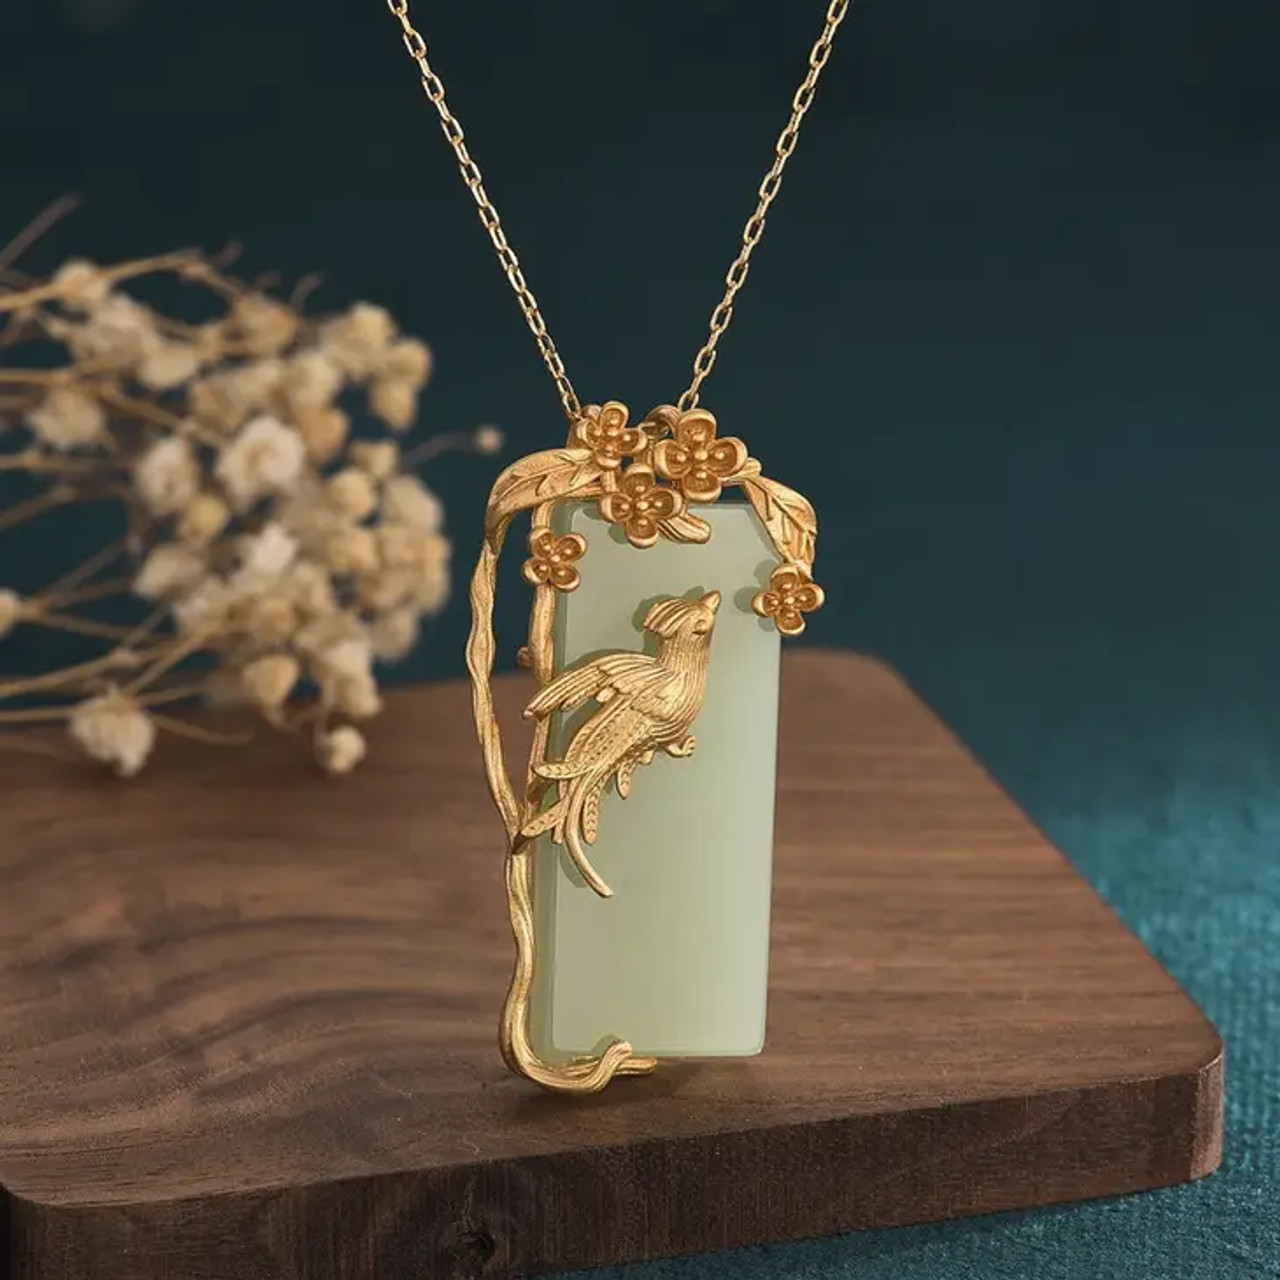 Adorable love birds are perched together on this yellow gold necklace. |  Necklace, Yellow gold necklaces, Jewelry advice